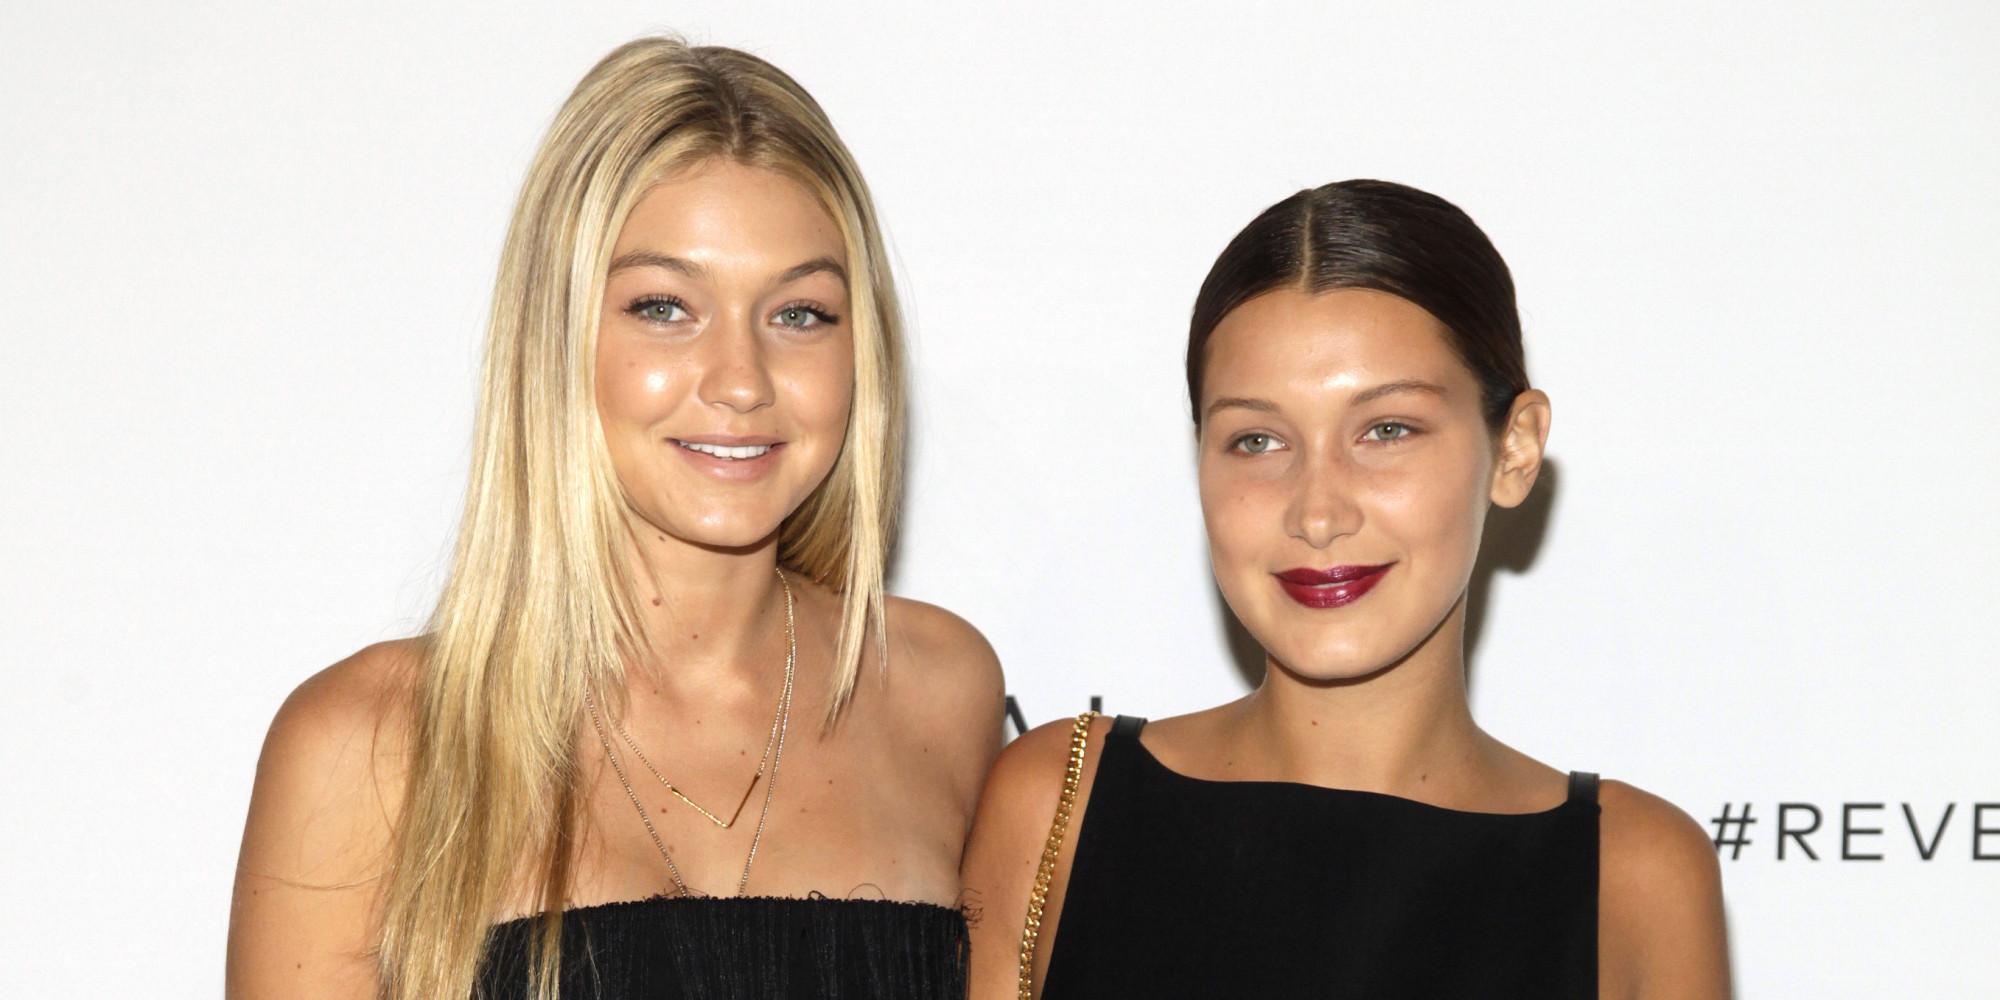 Gigi Hadid, left, and Bella Hadid, right, attend the REVEAL Calvin Klein launch event on Monday, Sept. 8, 2014 in New York. (Photo by Andy Kropa/Invision/AP)